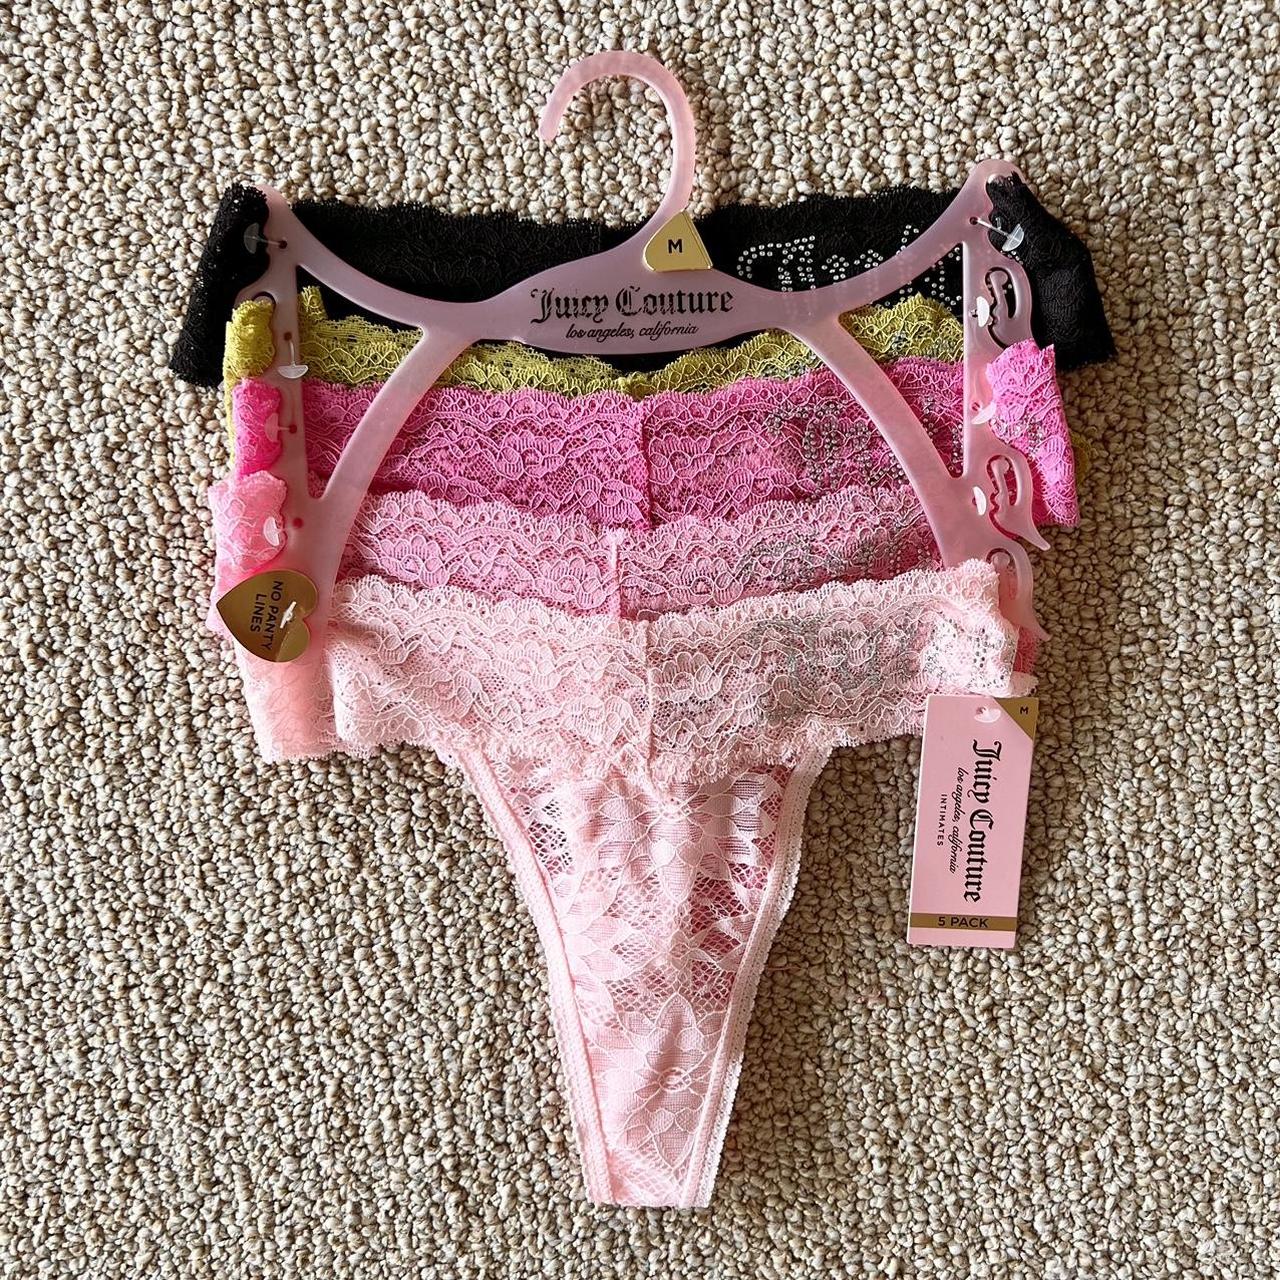 Women's Juicy Couture Underwear, New & Used